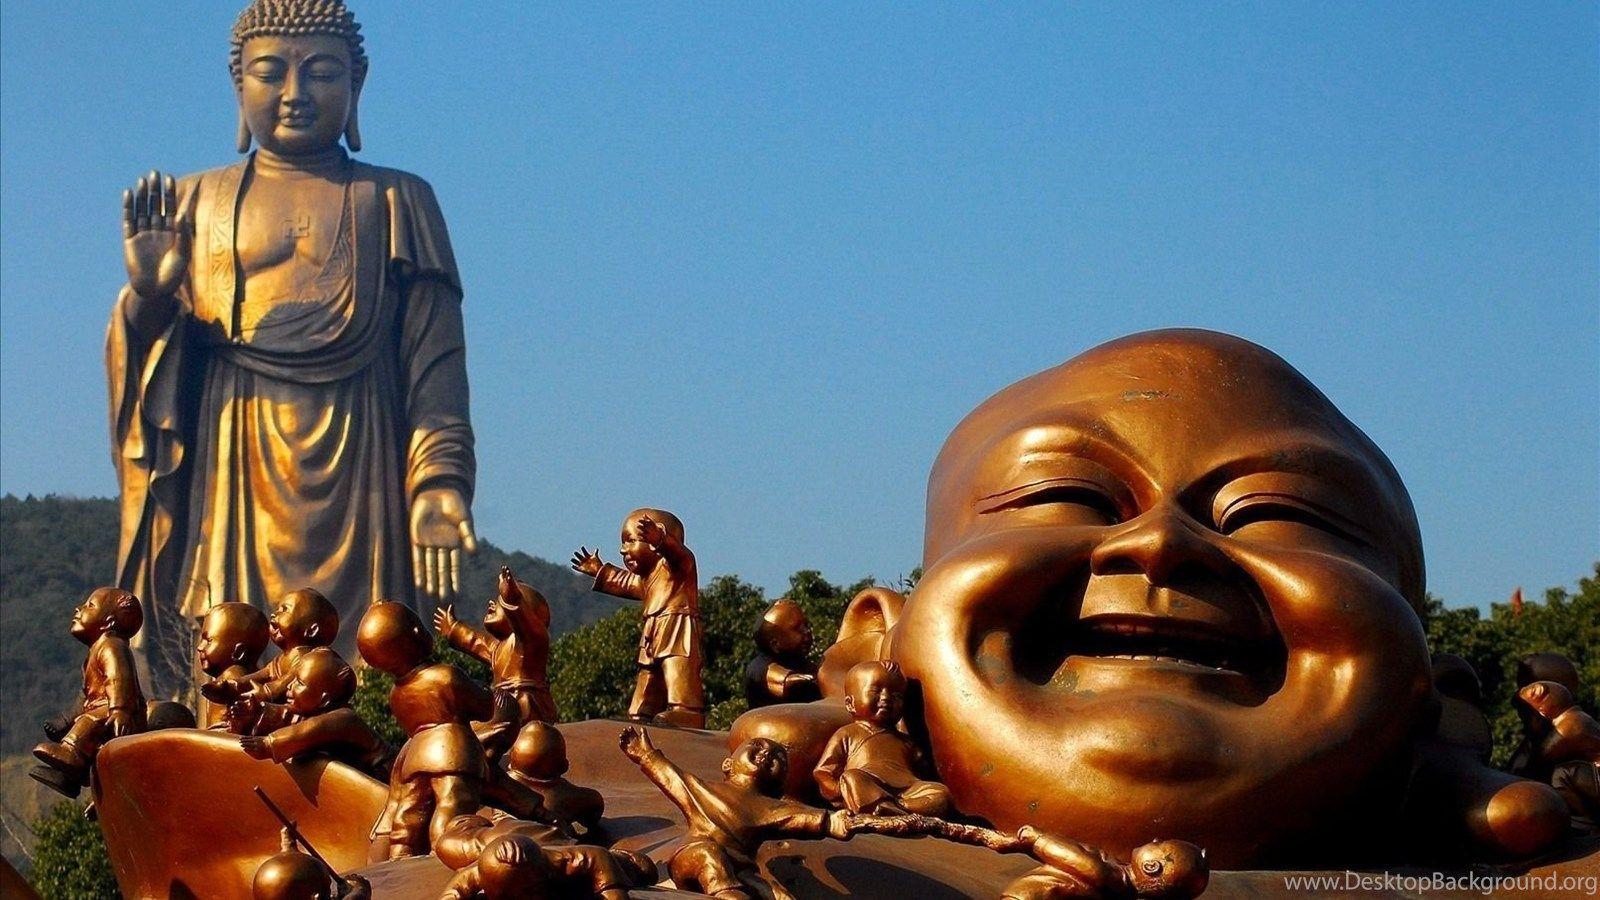 Laughing Buddha Free HD Wallpaper And Picture Gallery Desktop